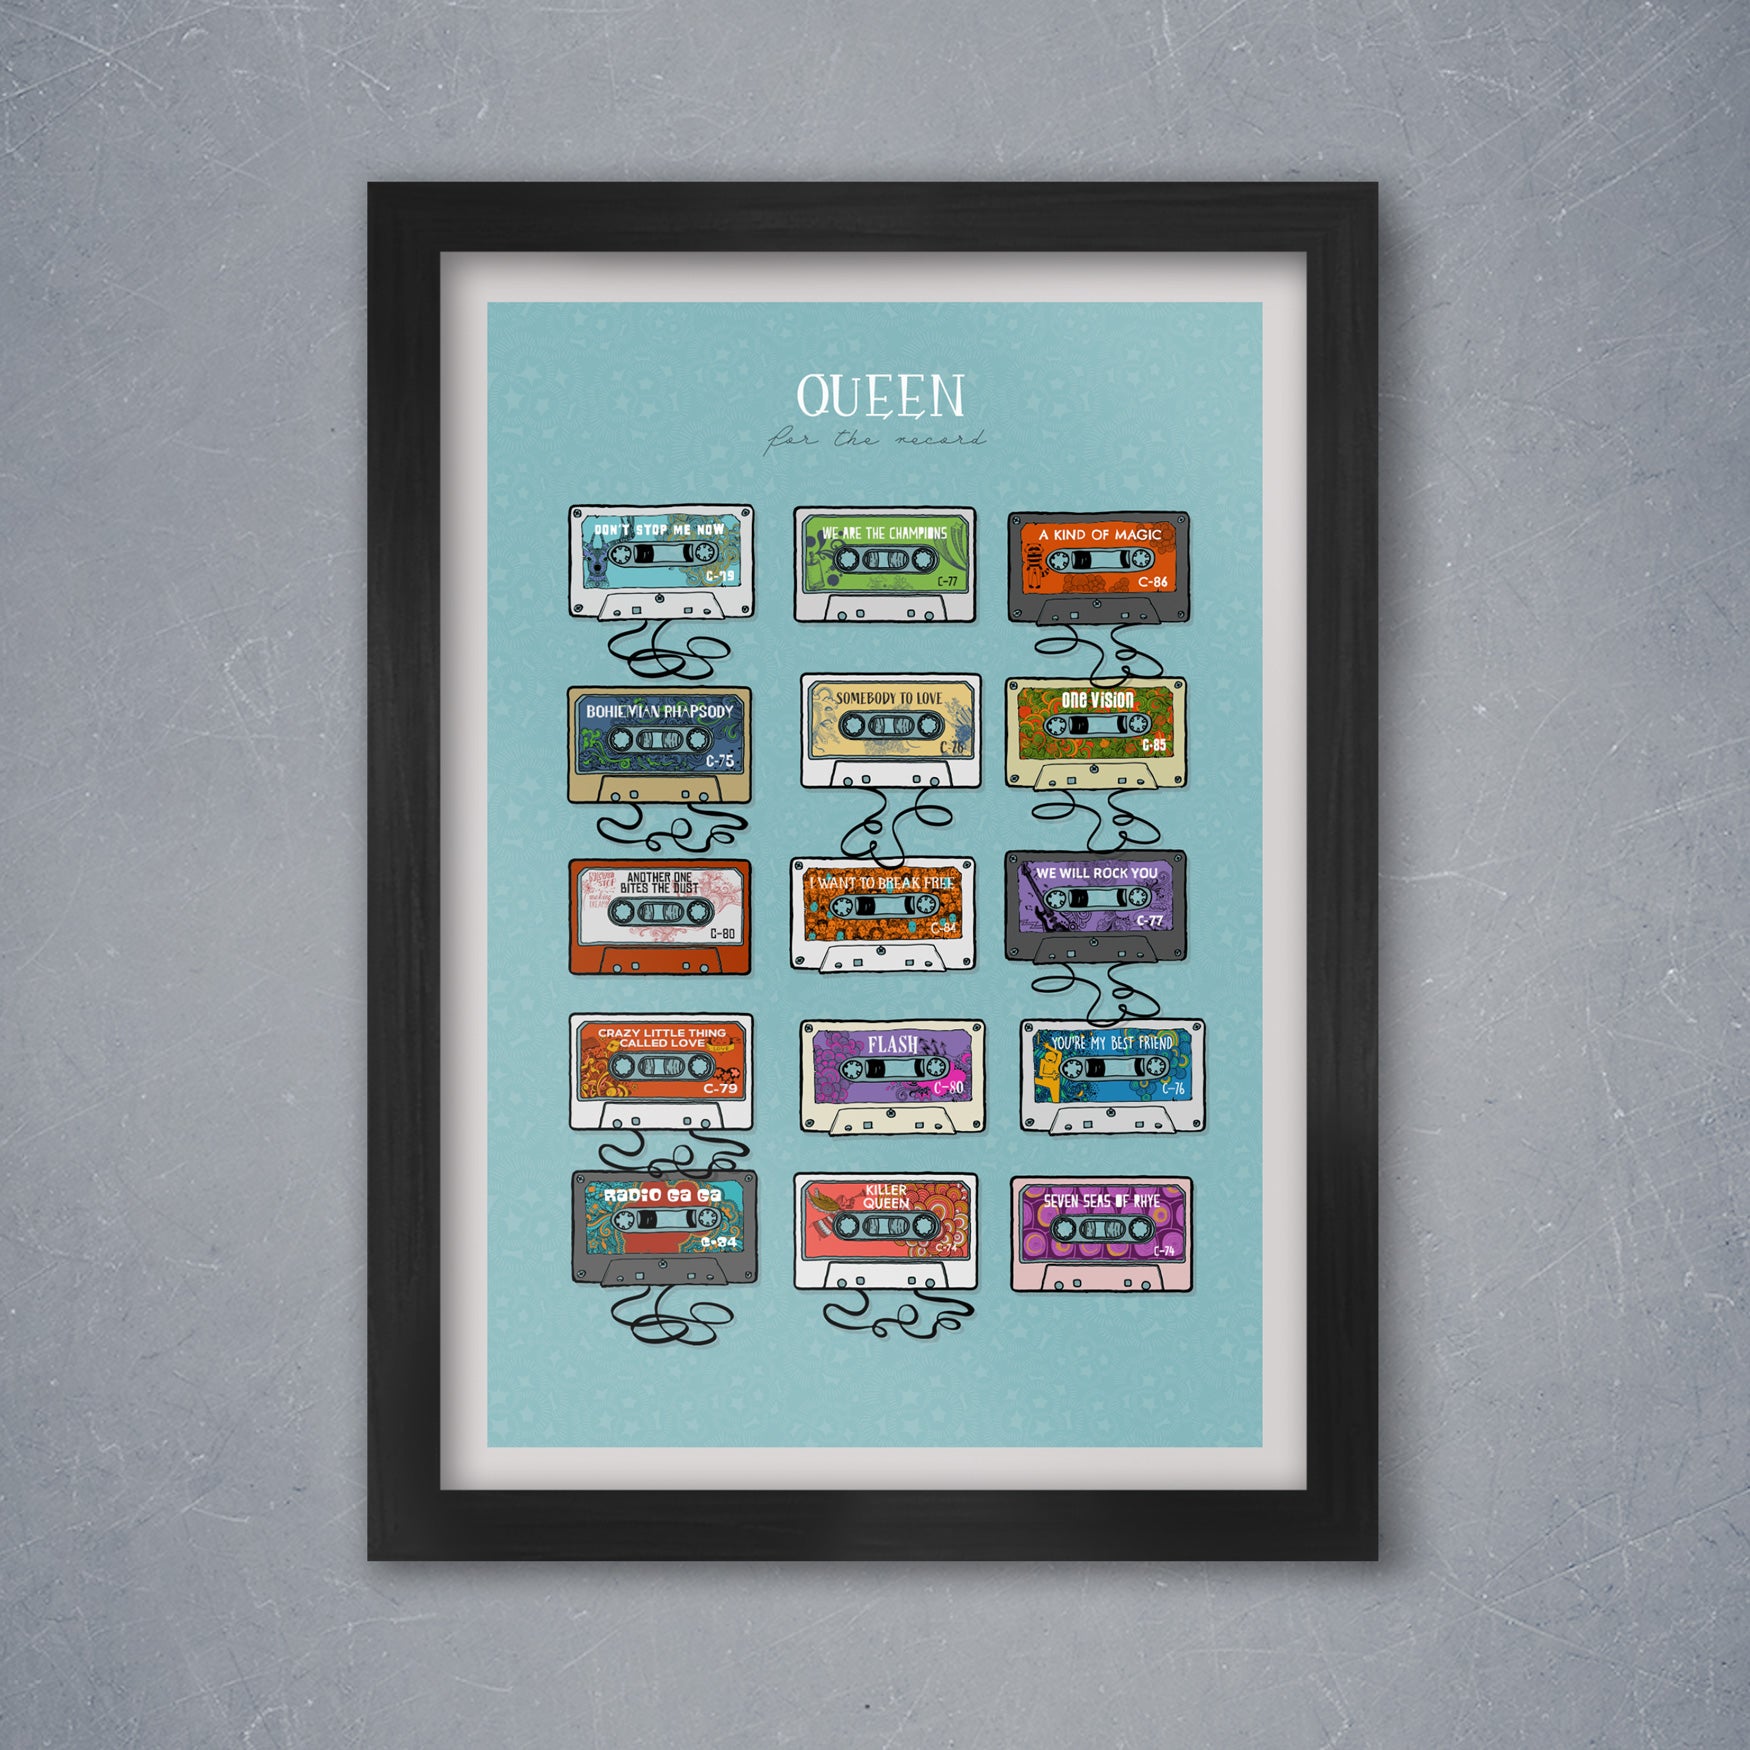 Queen, colourful music print designed in cassette tape style